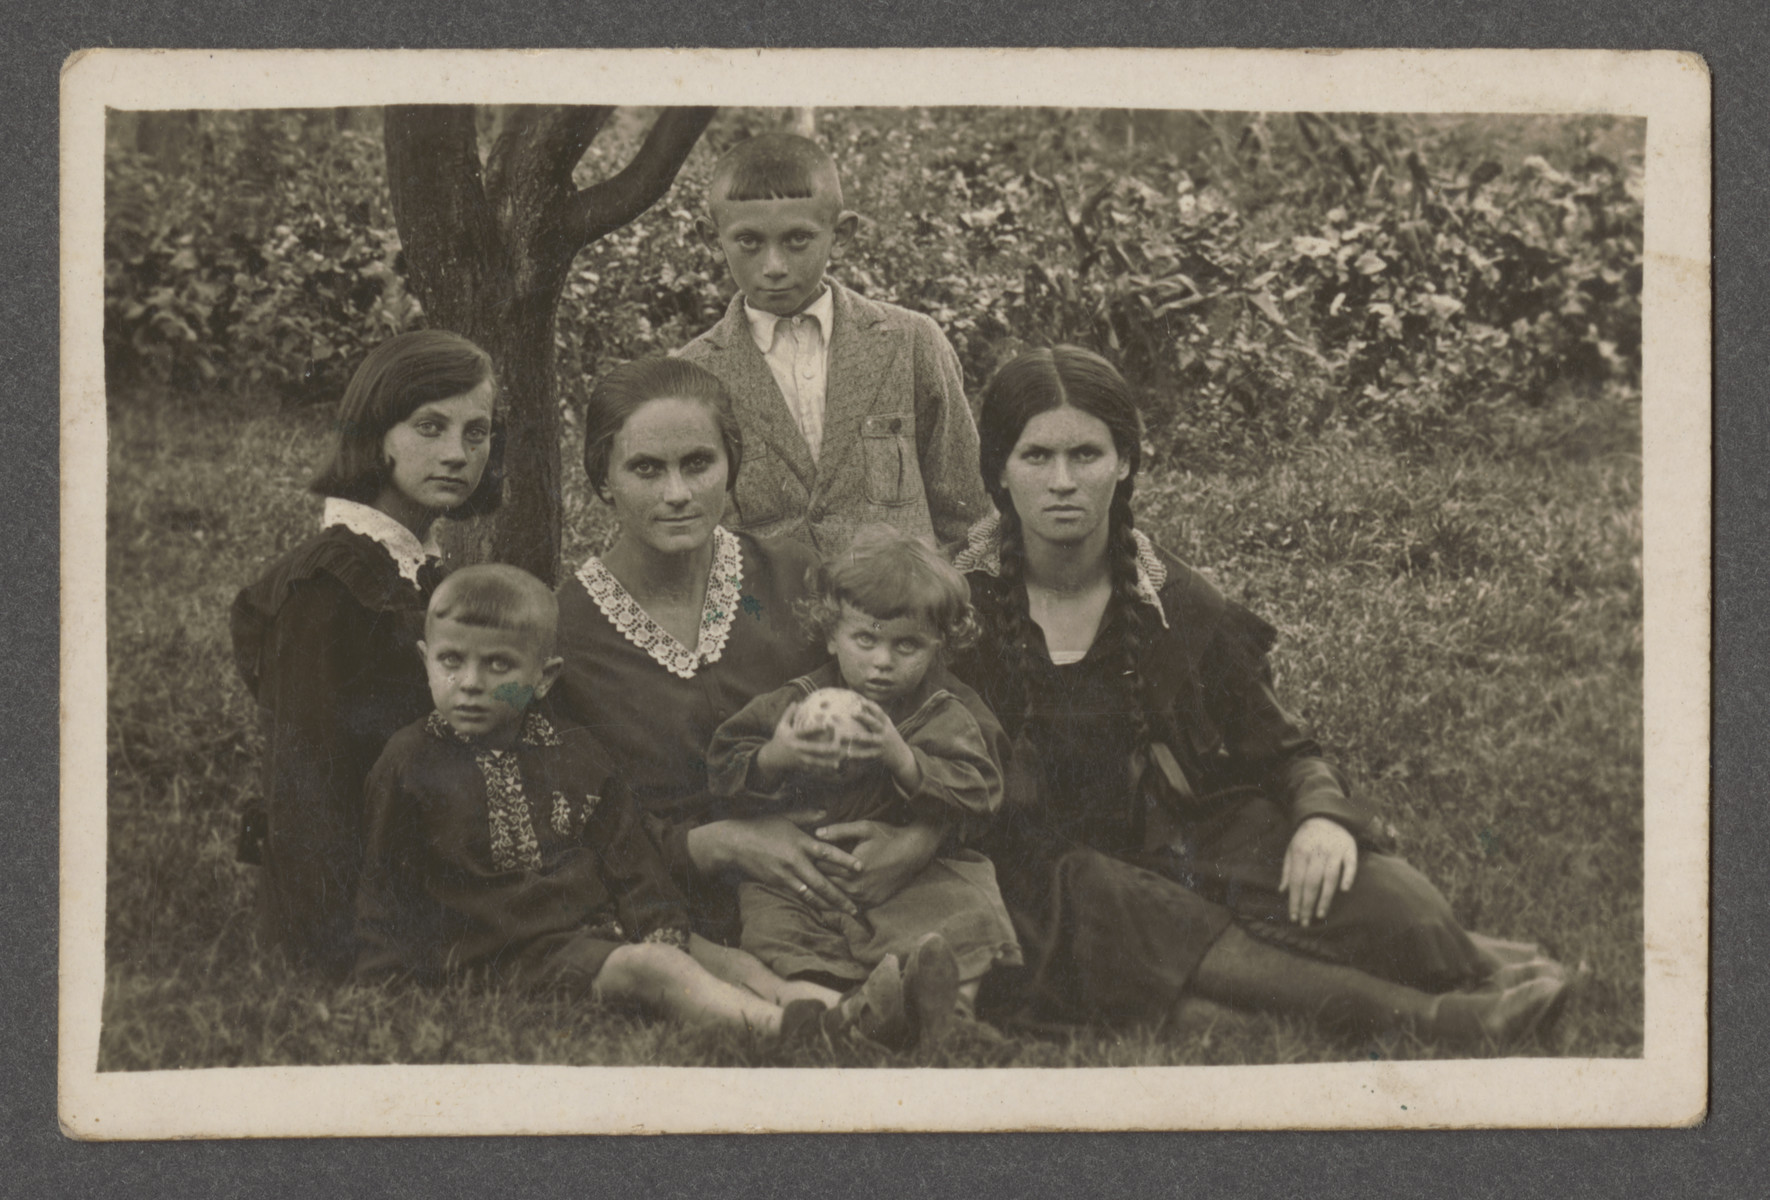 The Szwarcman family poses outside in prewar Aleksandria.

Pictured from left to right are the Szwarcman siblings Fania, Rosa, Boris and Sonia.  Pictured in front are Rosa's two children .